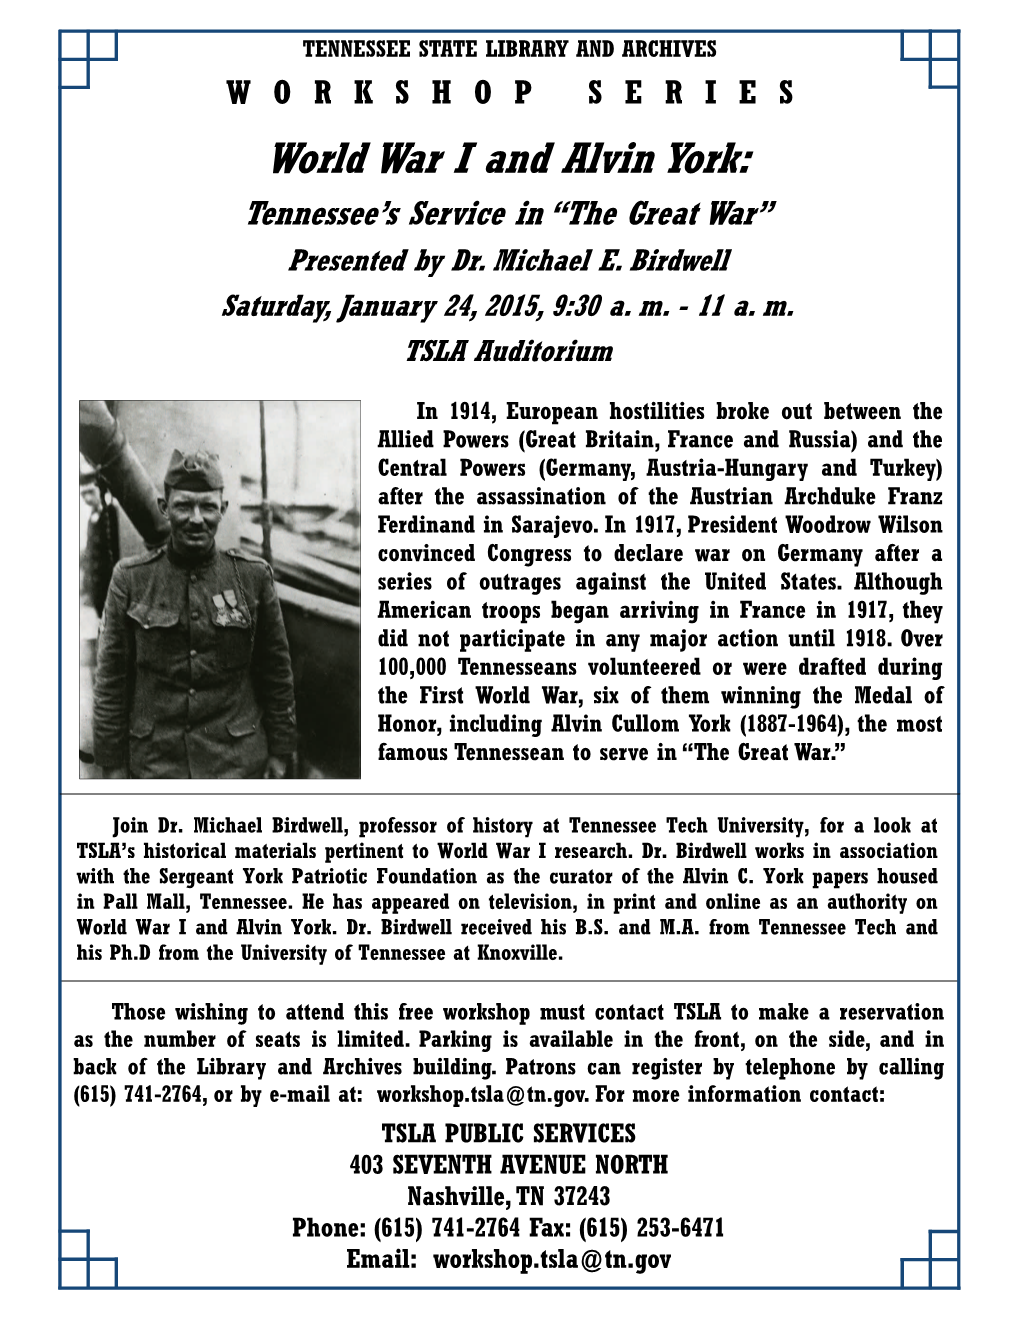 World War I and Alvin York: Tennessee’S Service in “The Great War” Presented by Dr